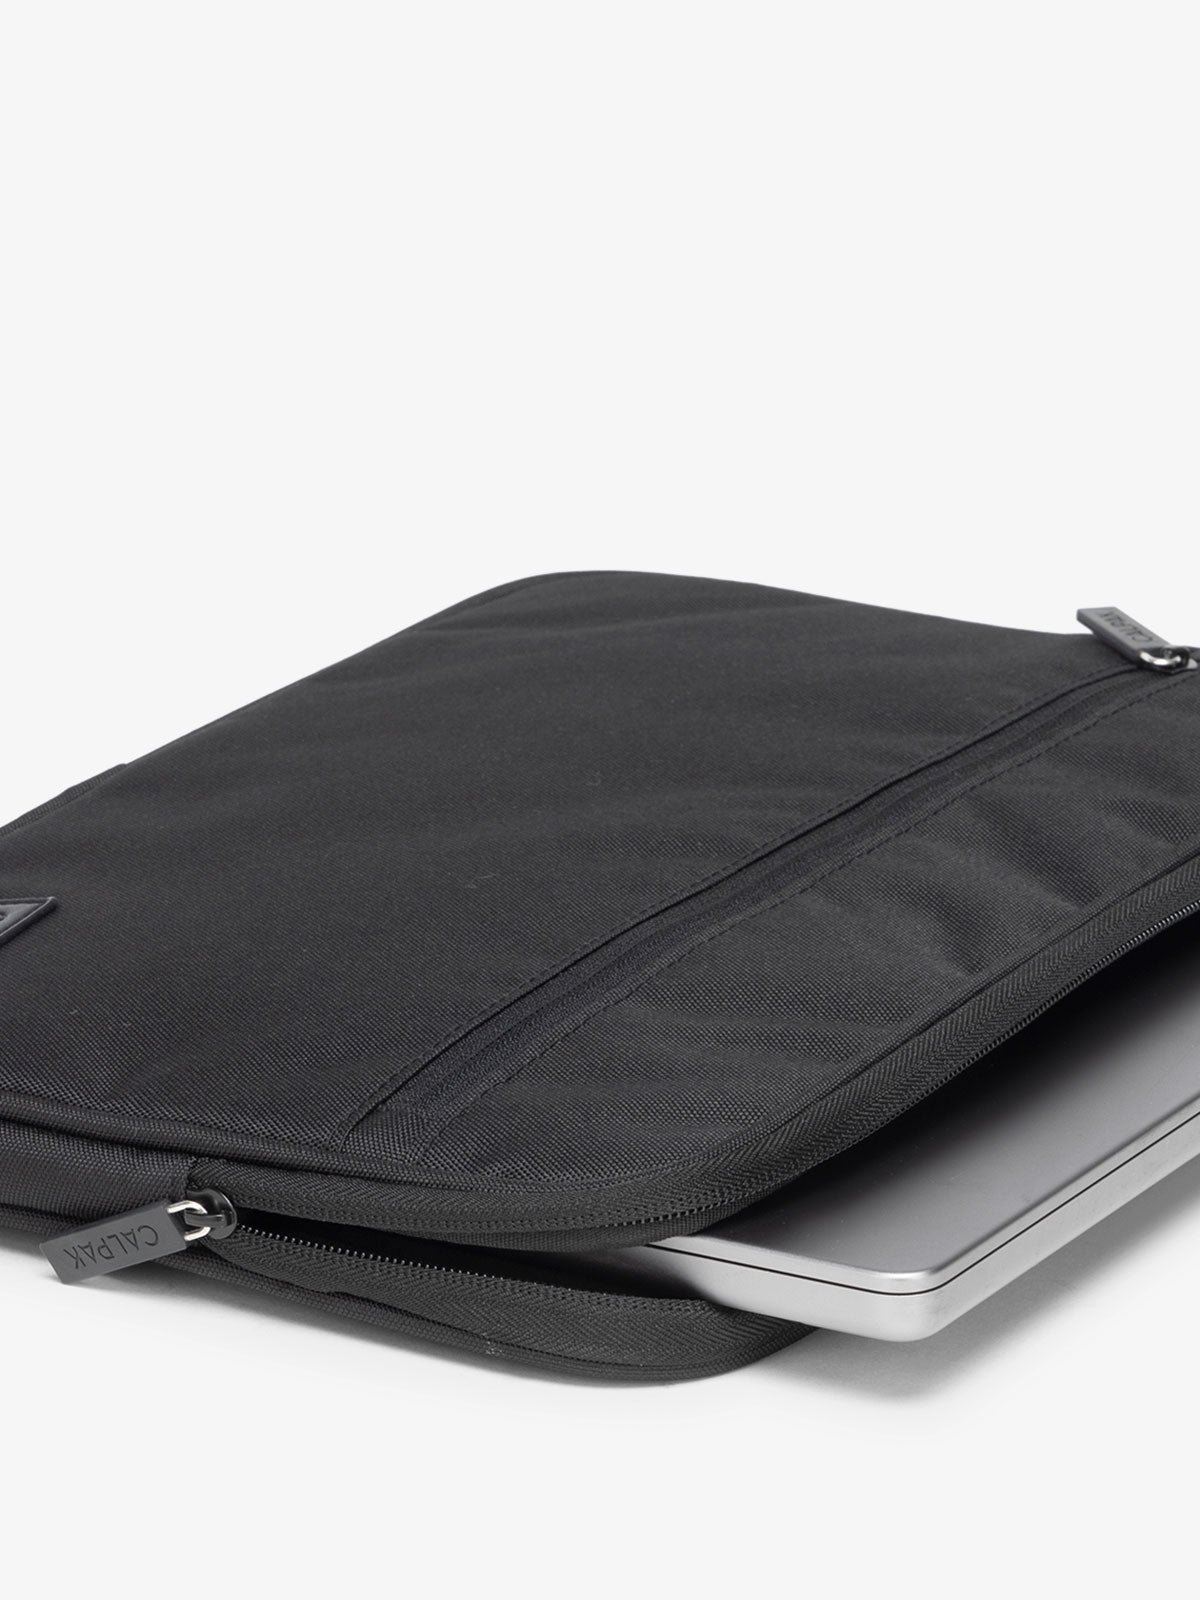 CALPAK 15-17" laptop sleeve with front zipper pouch in black